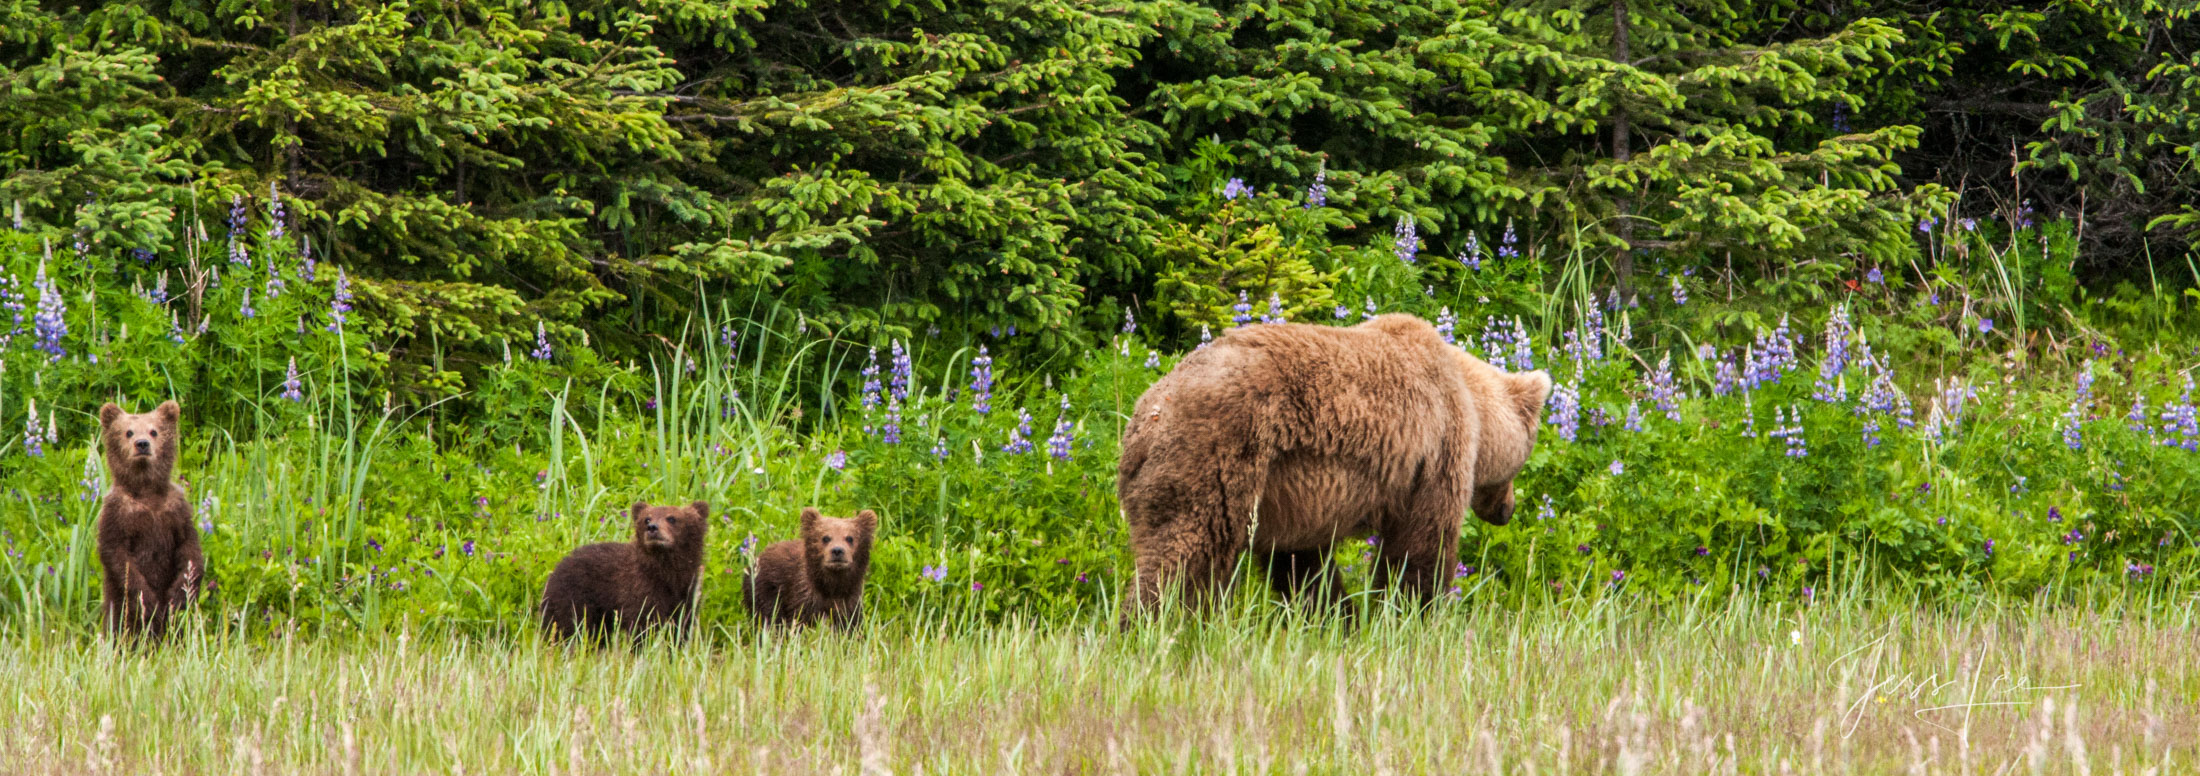 Picture of Grizzly bear and cubs